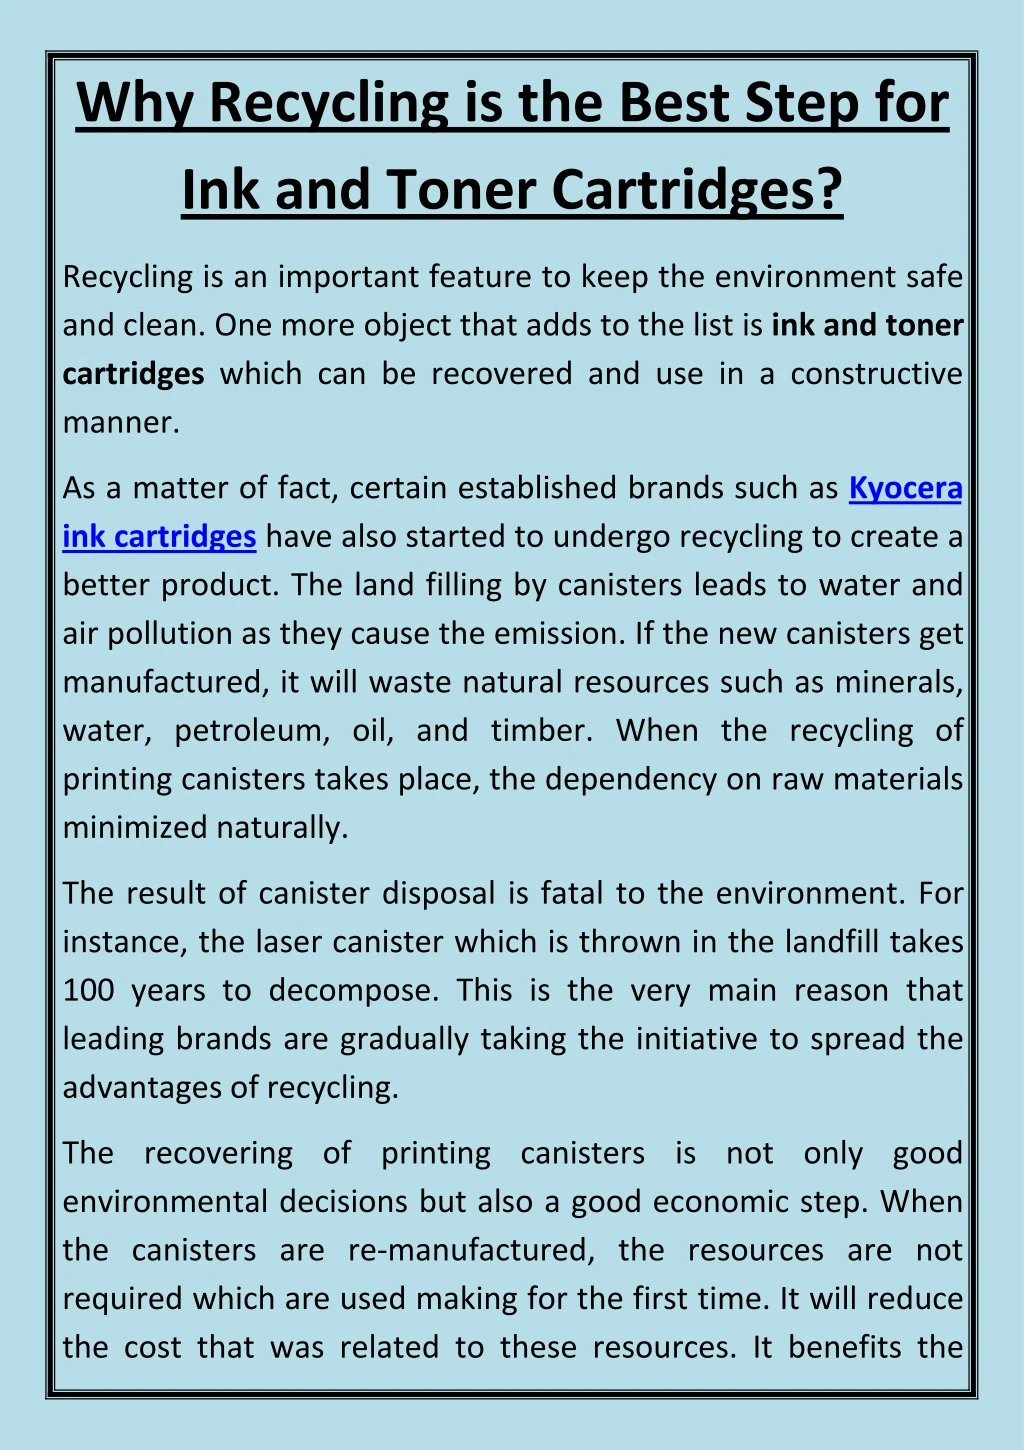 why recycling is the best step for ink and toner